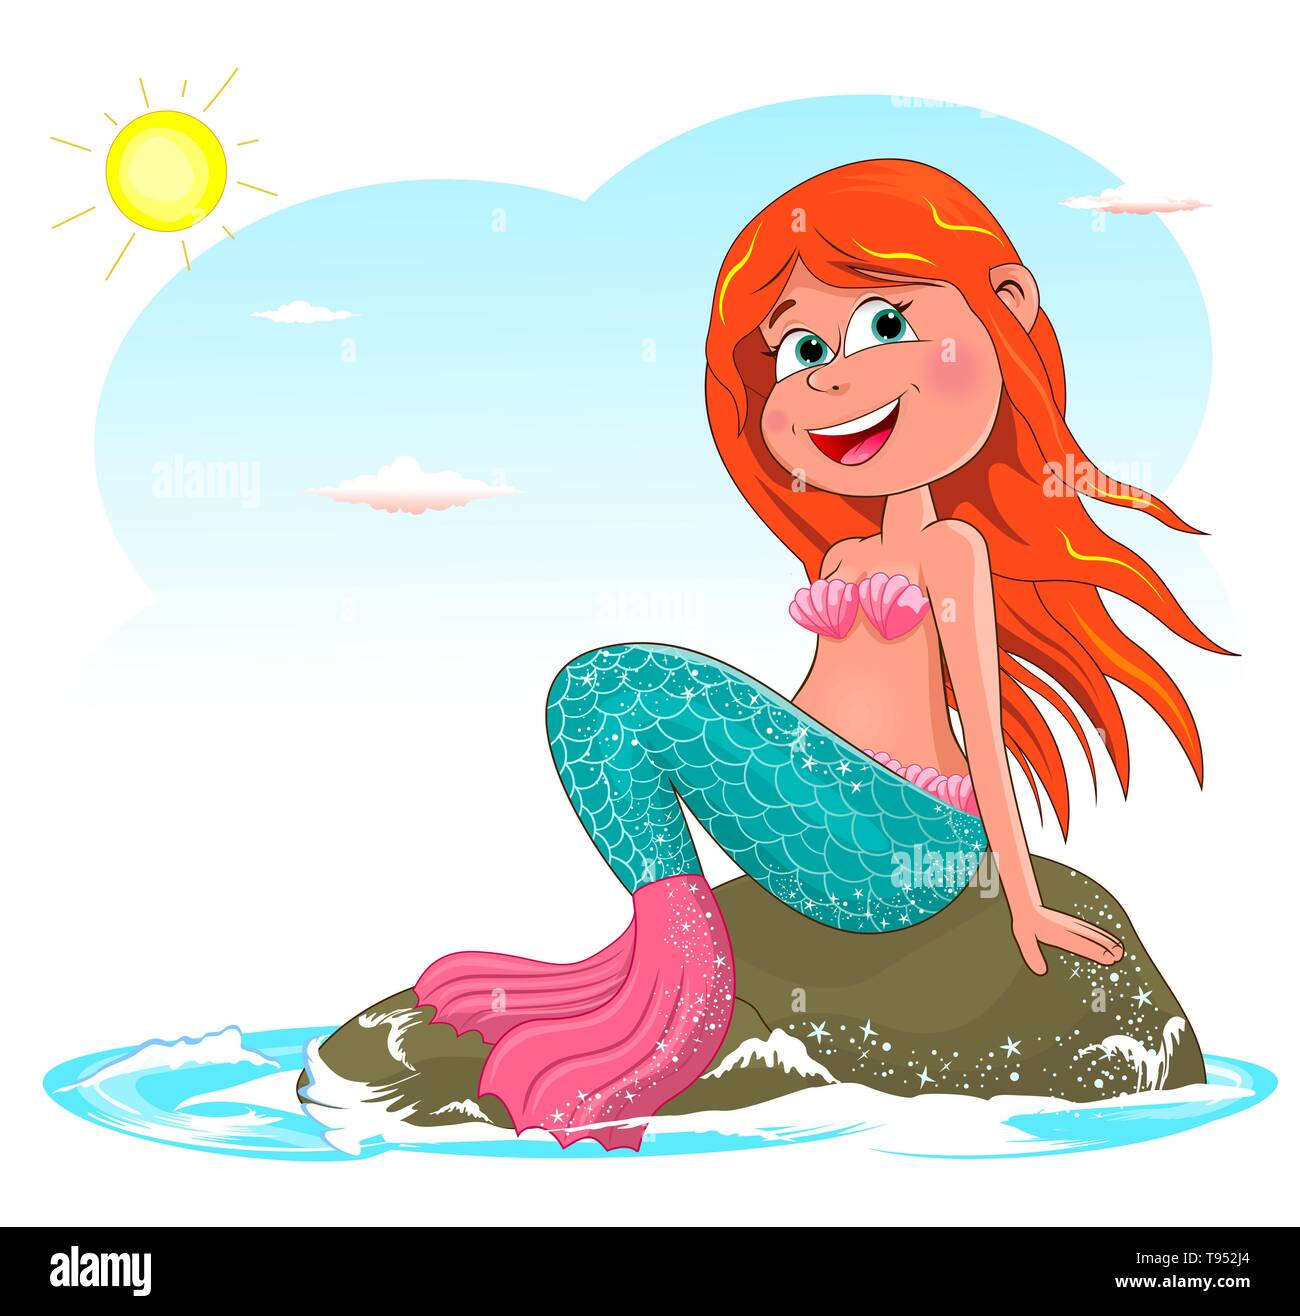 Beautiful mermaid sitting on a sea stone. Mermaid with red hair against the sky. Stock Vector